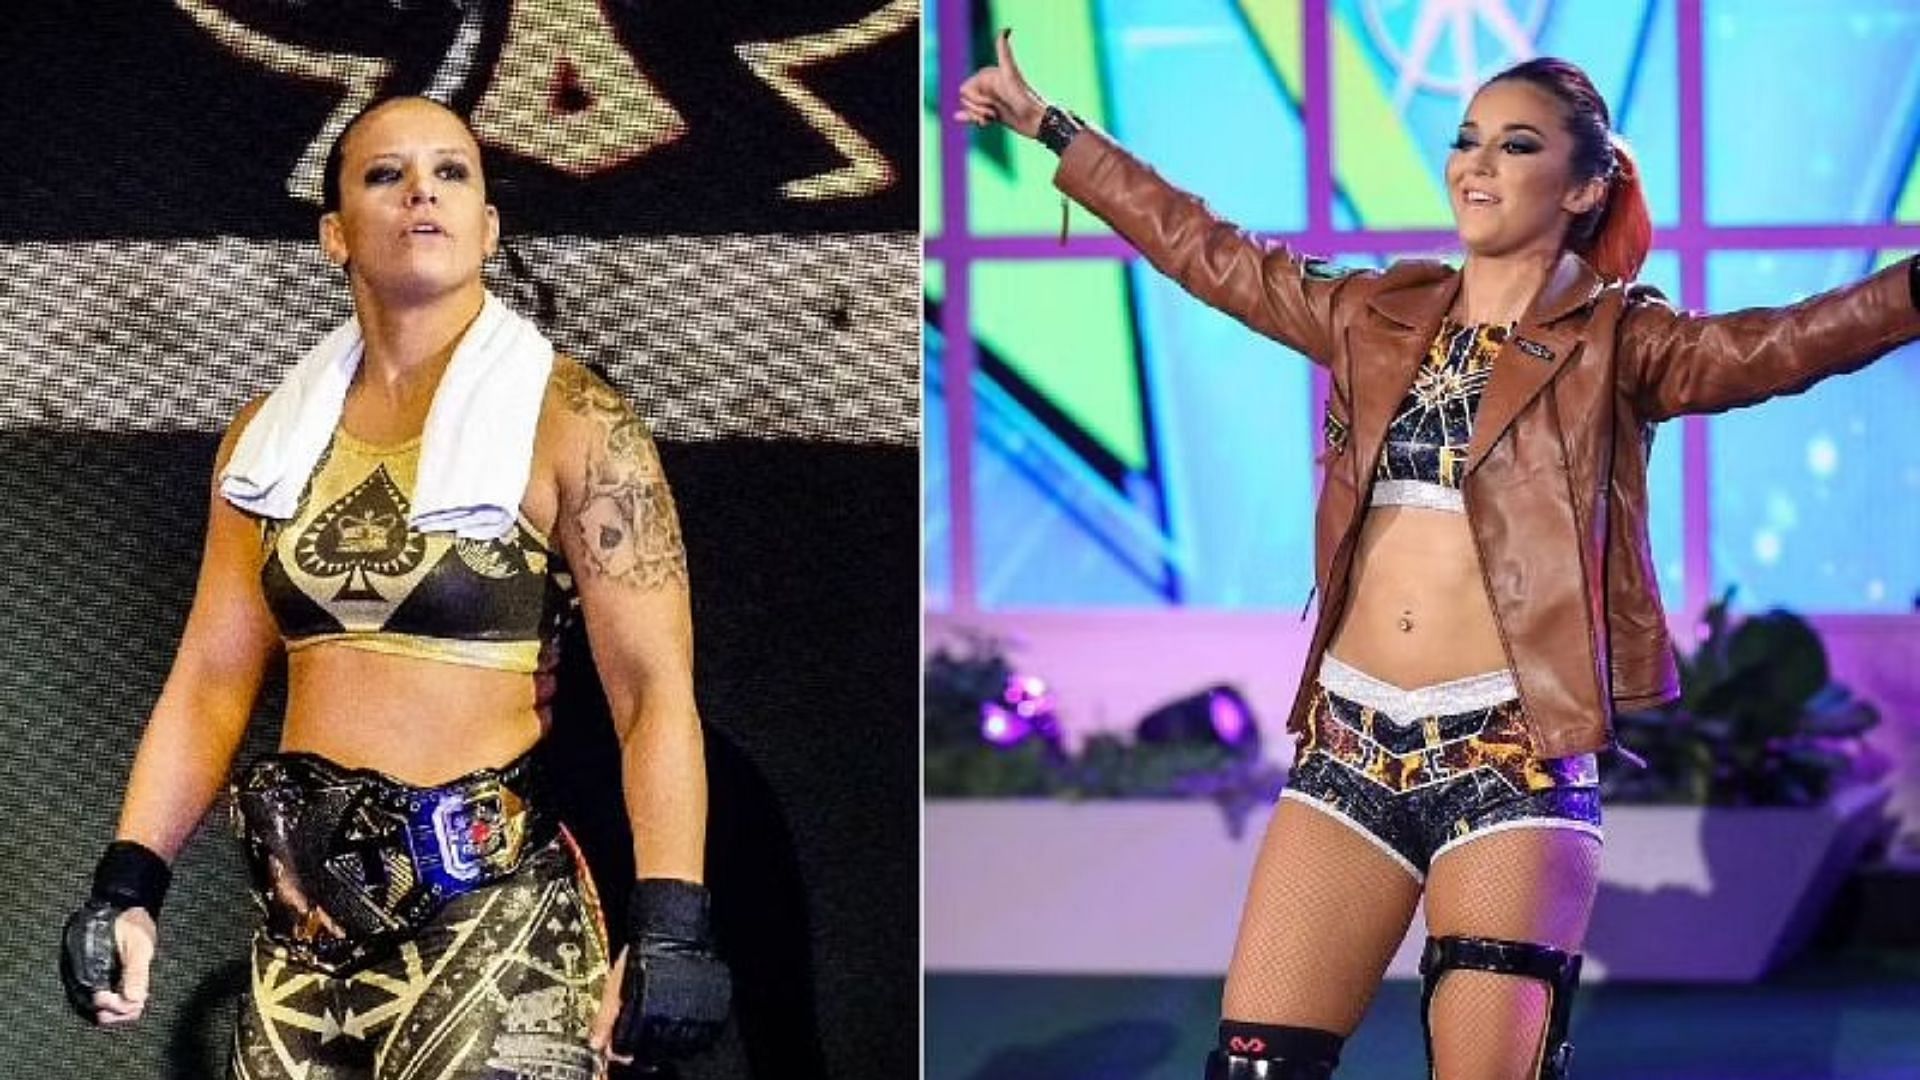 Wwe Girls Lesbian Xxx Video - WWE: 6 Current/Former stars who are proud to be LGBTQ